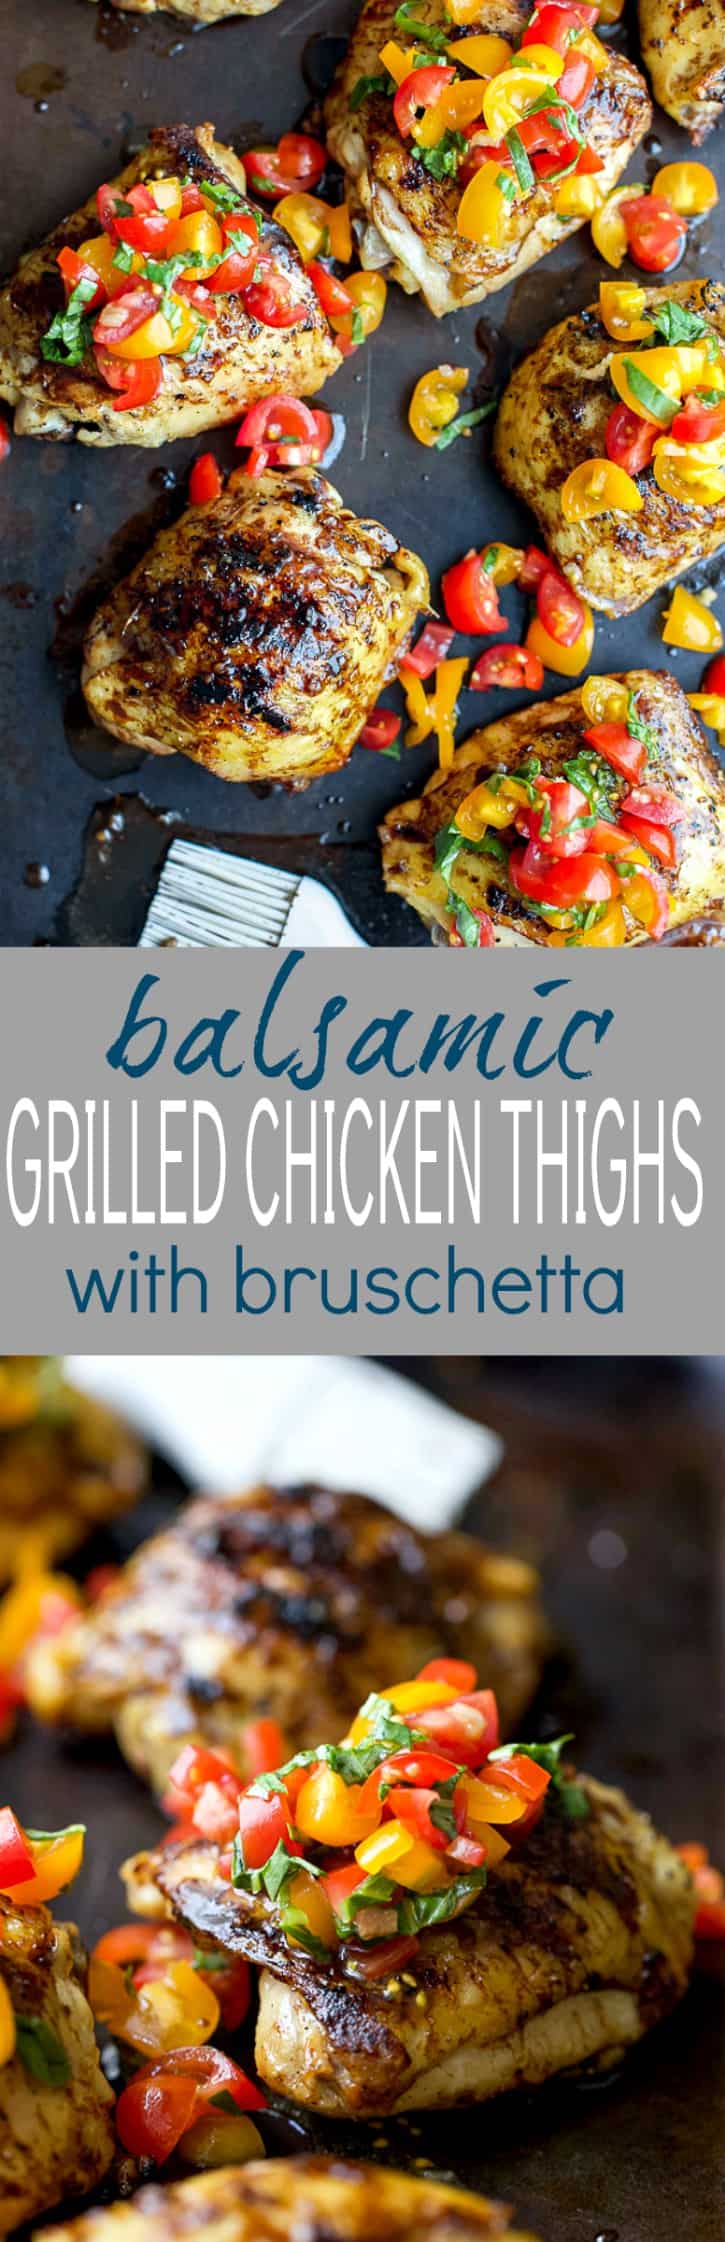 Title image for Balsamic Grilled Chicken Thighs with Bruschetta